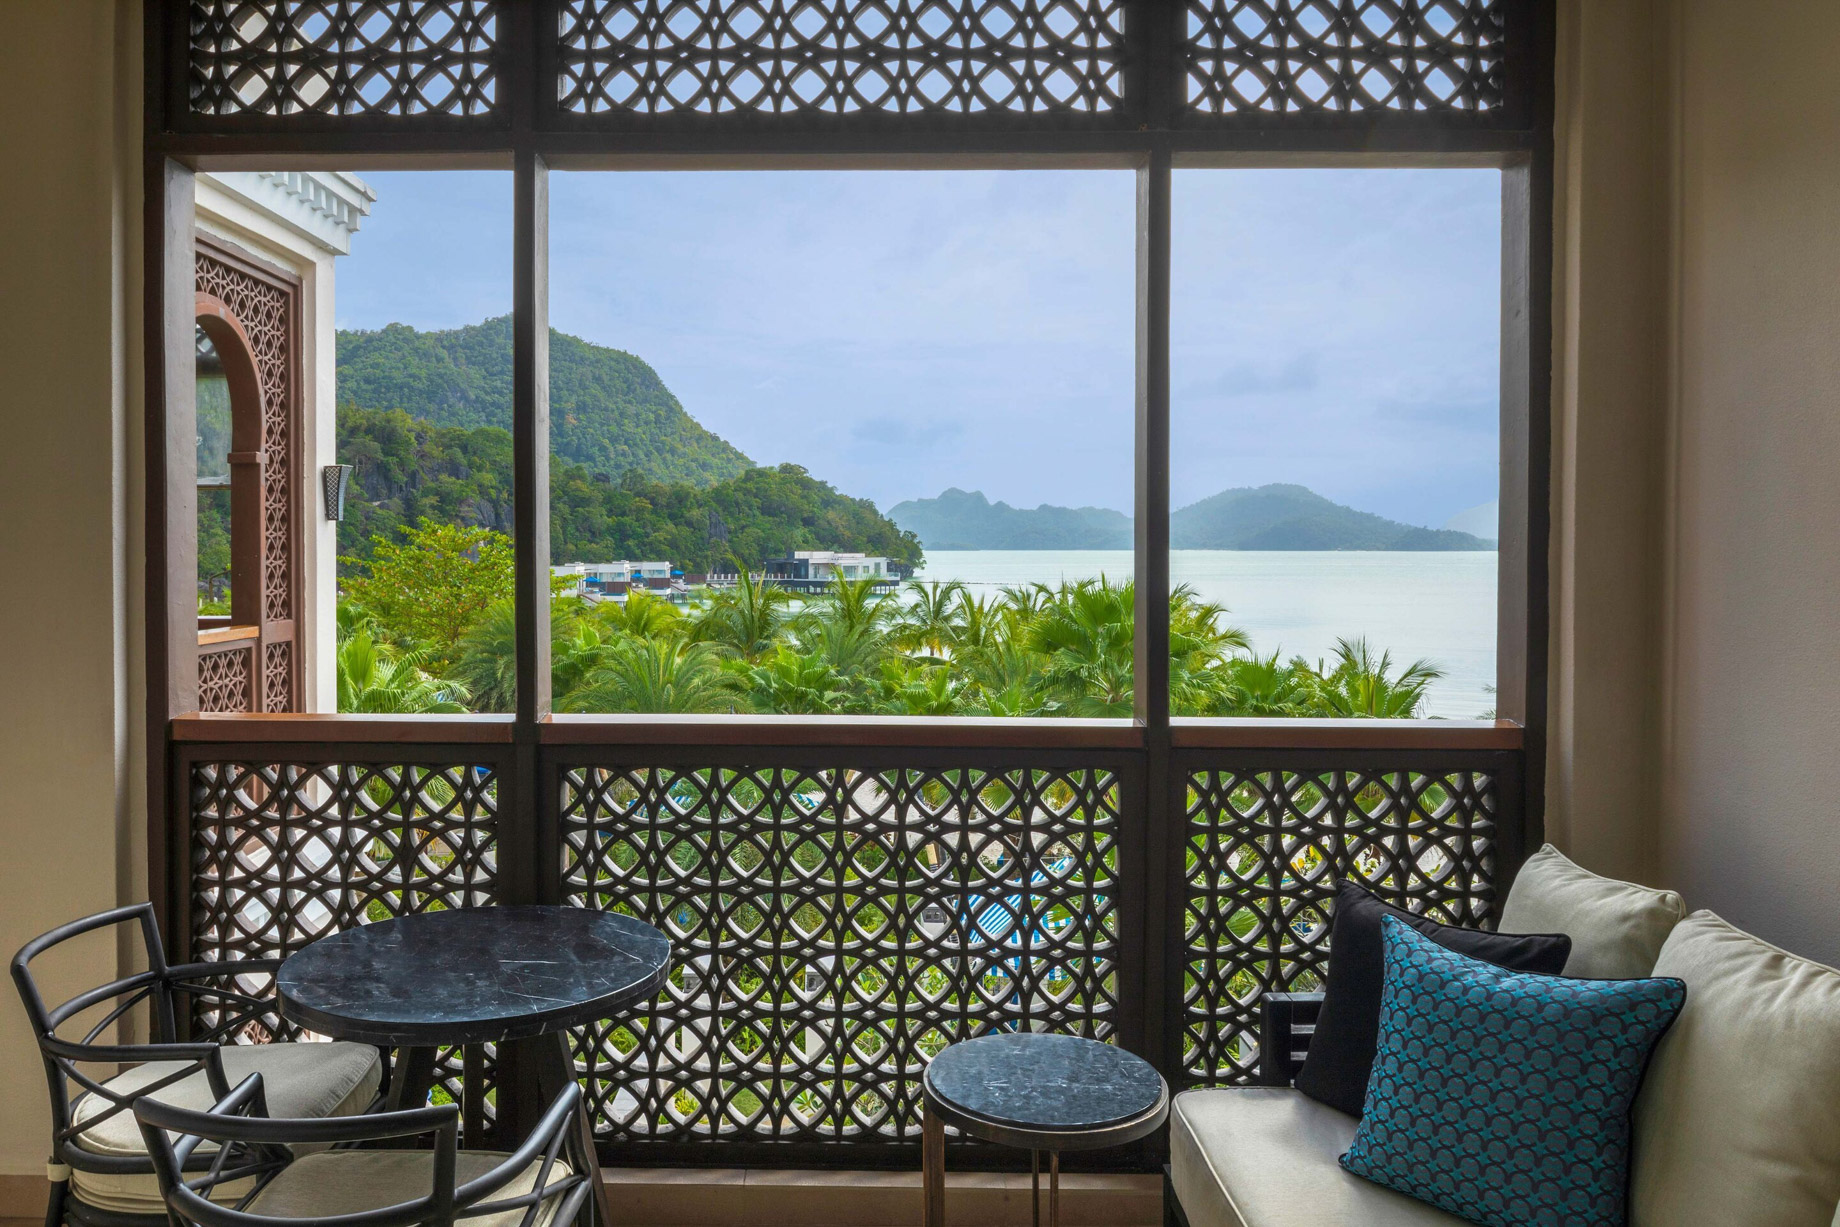 The St. Regis Langkawi Resort – Langkawi, Malaysia – Sea View Guest Room Balcony